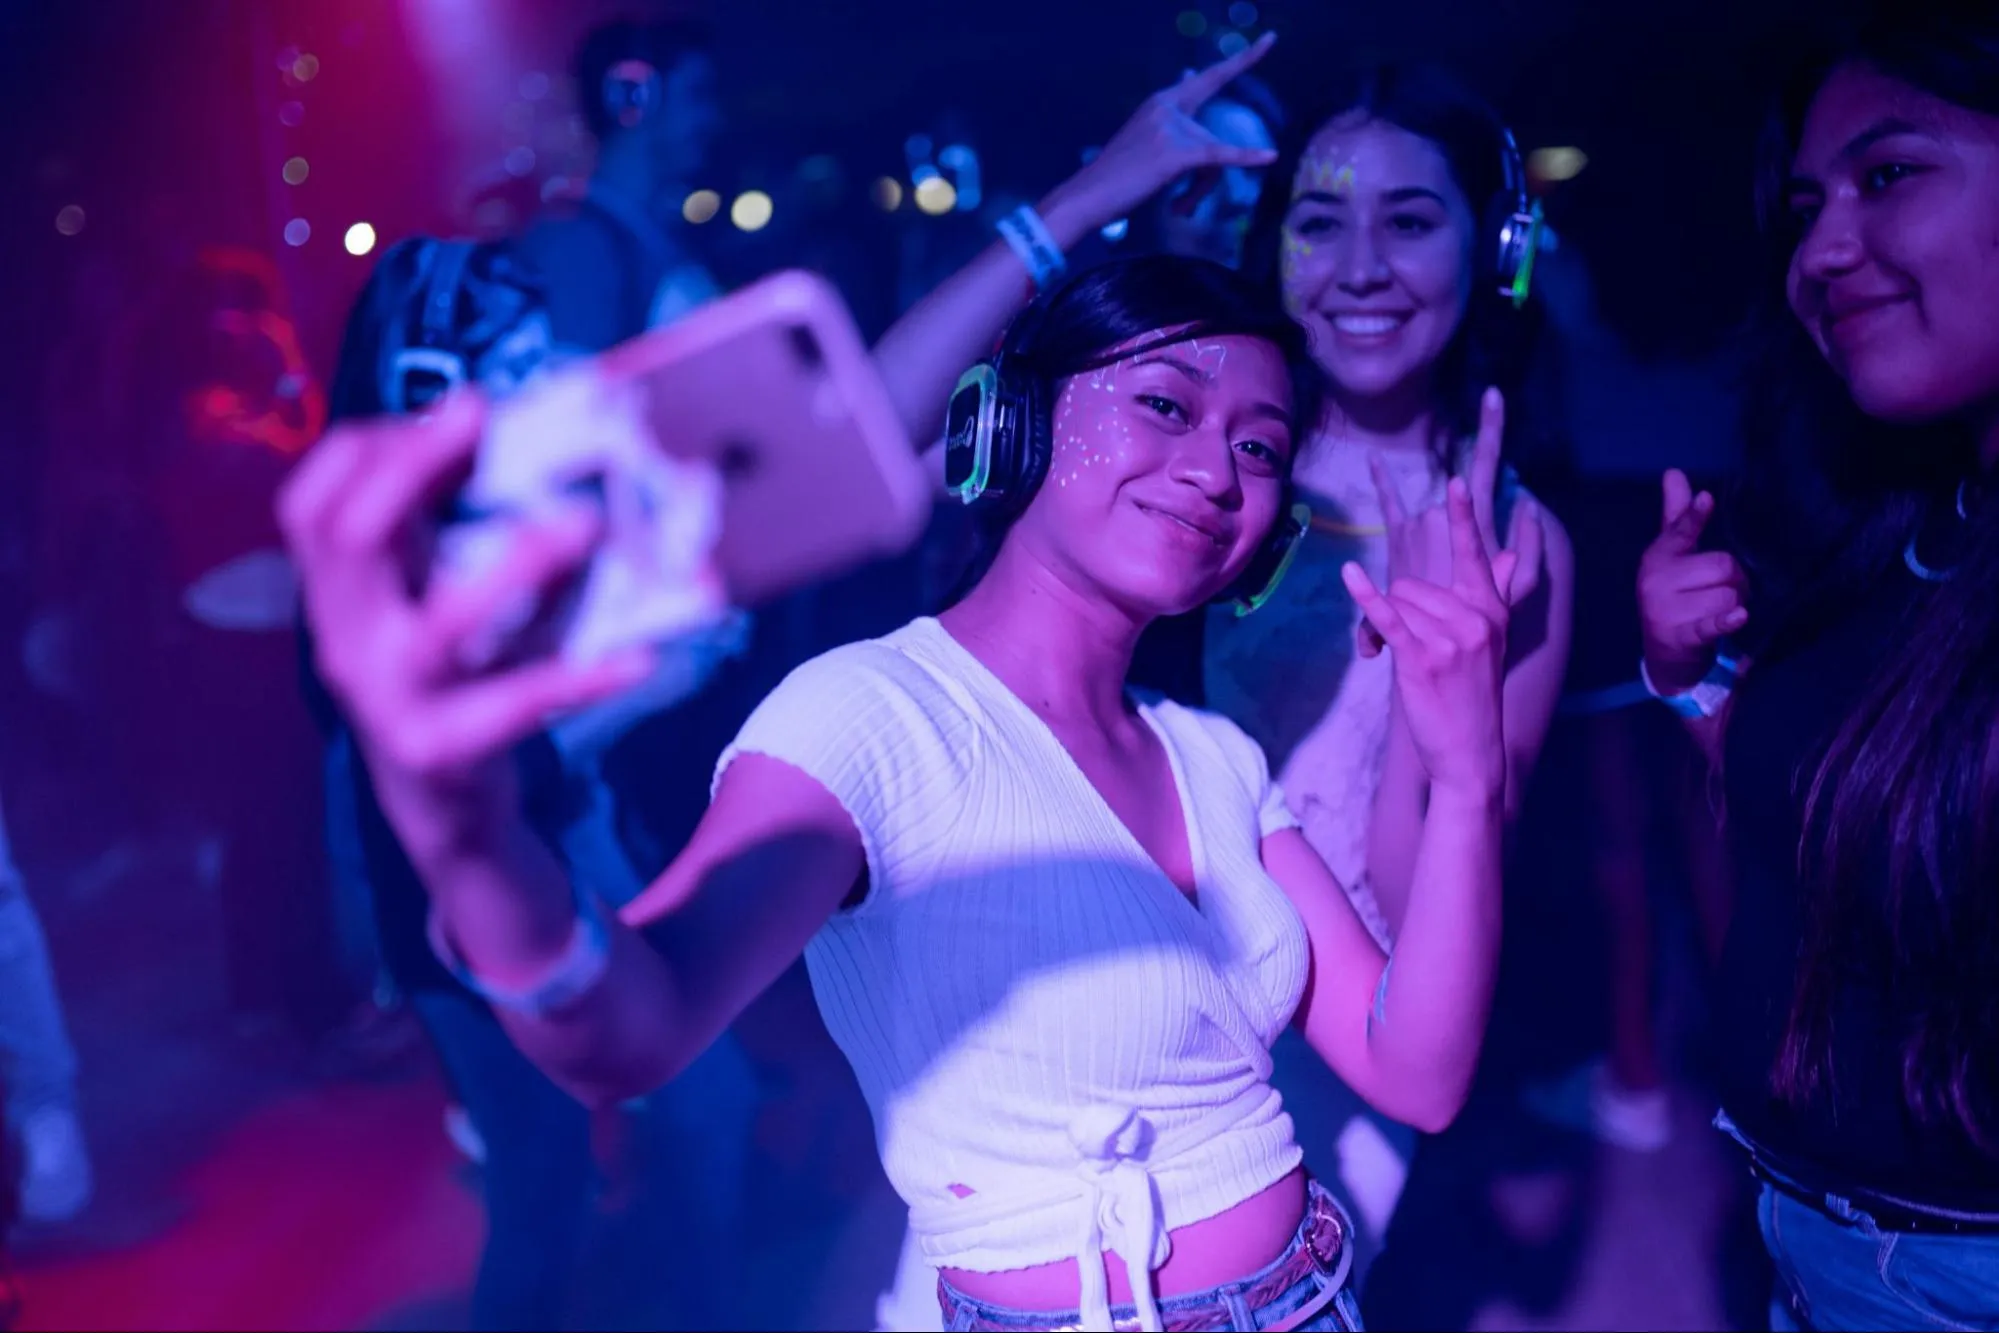 A joyful young woman takes a selfie with friends at White Room Night Club, with vivid blue and purple lighting reflecting their smiling faces and festive glow paint, capturing a moment of fun and connection.